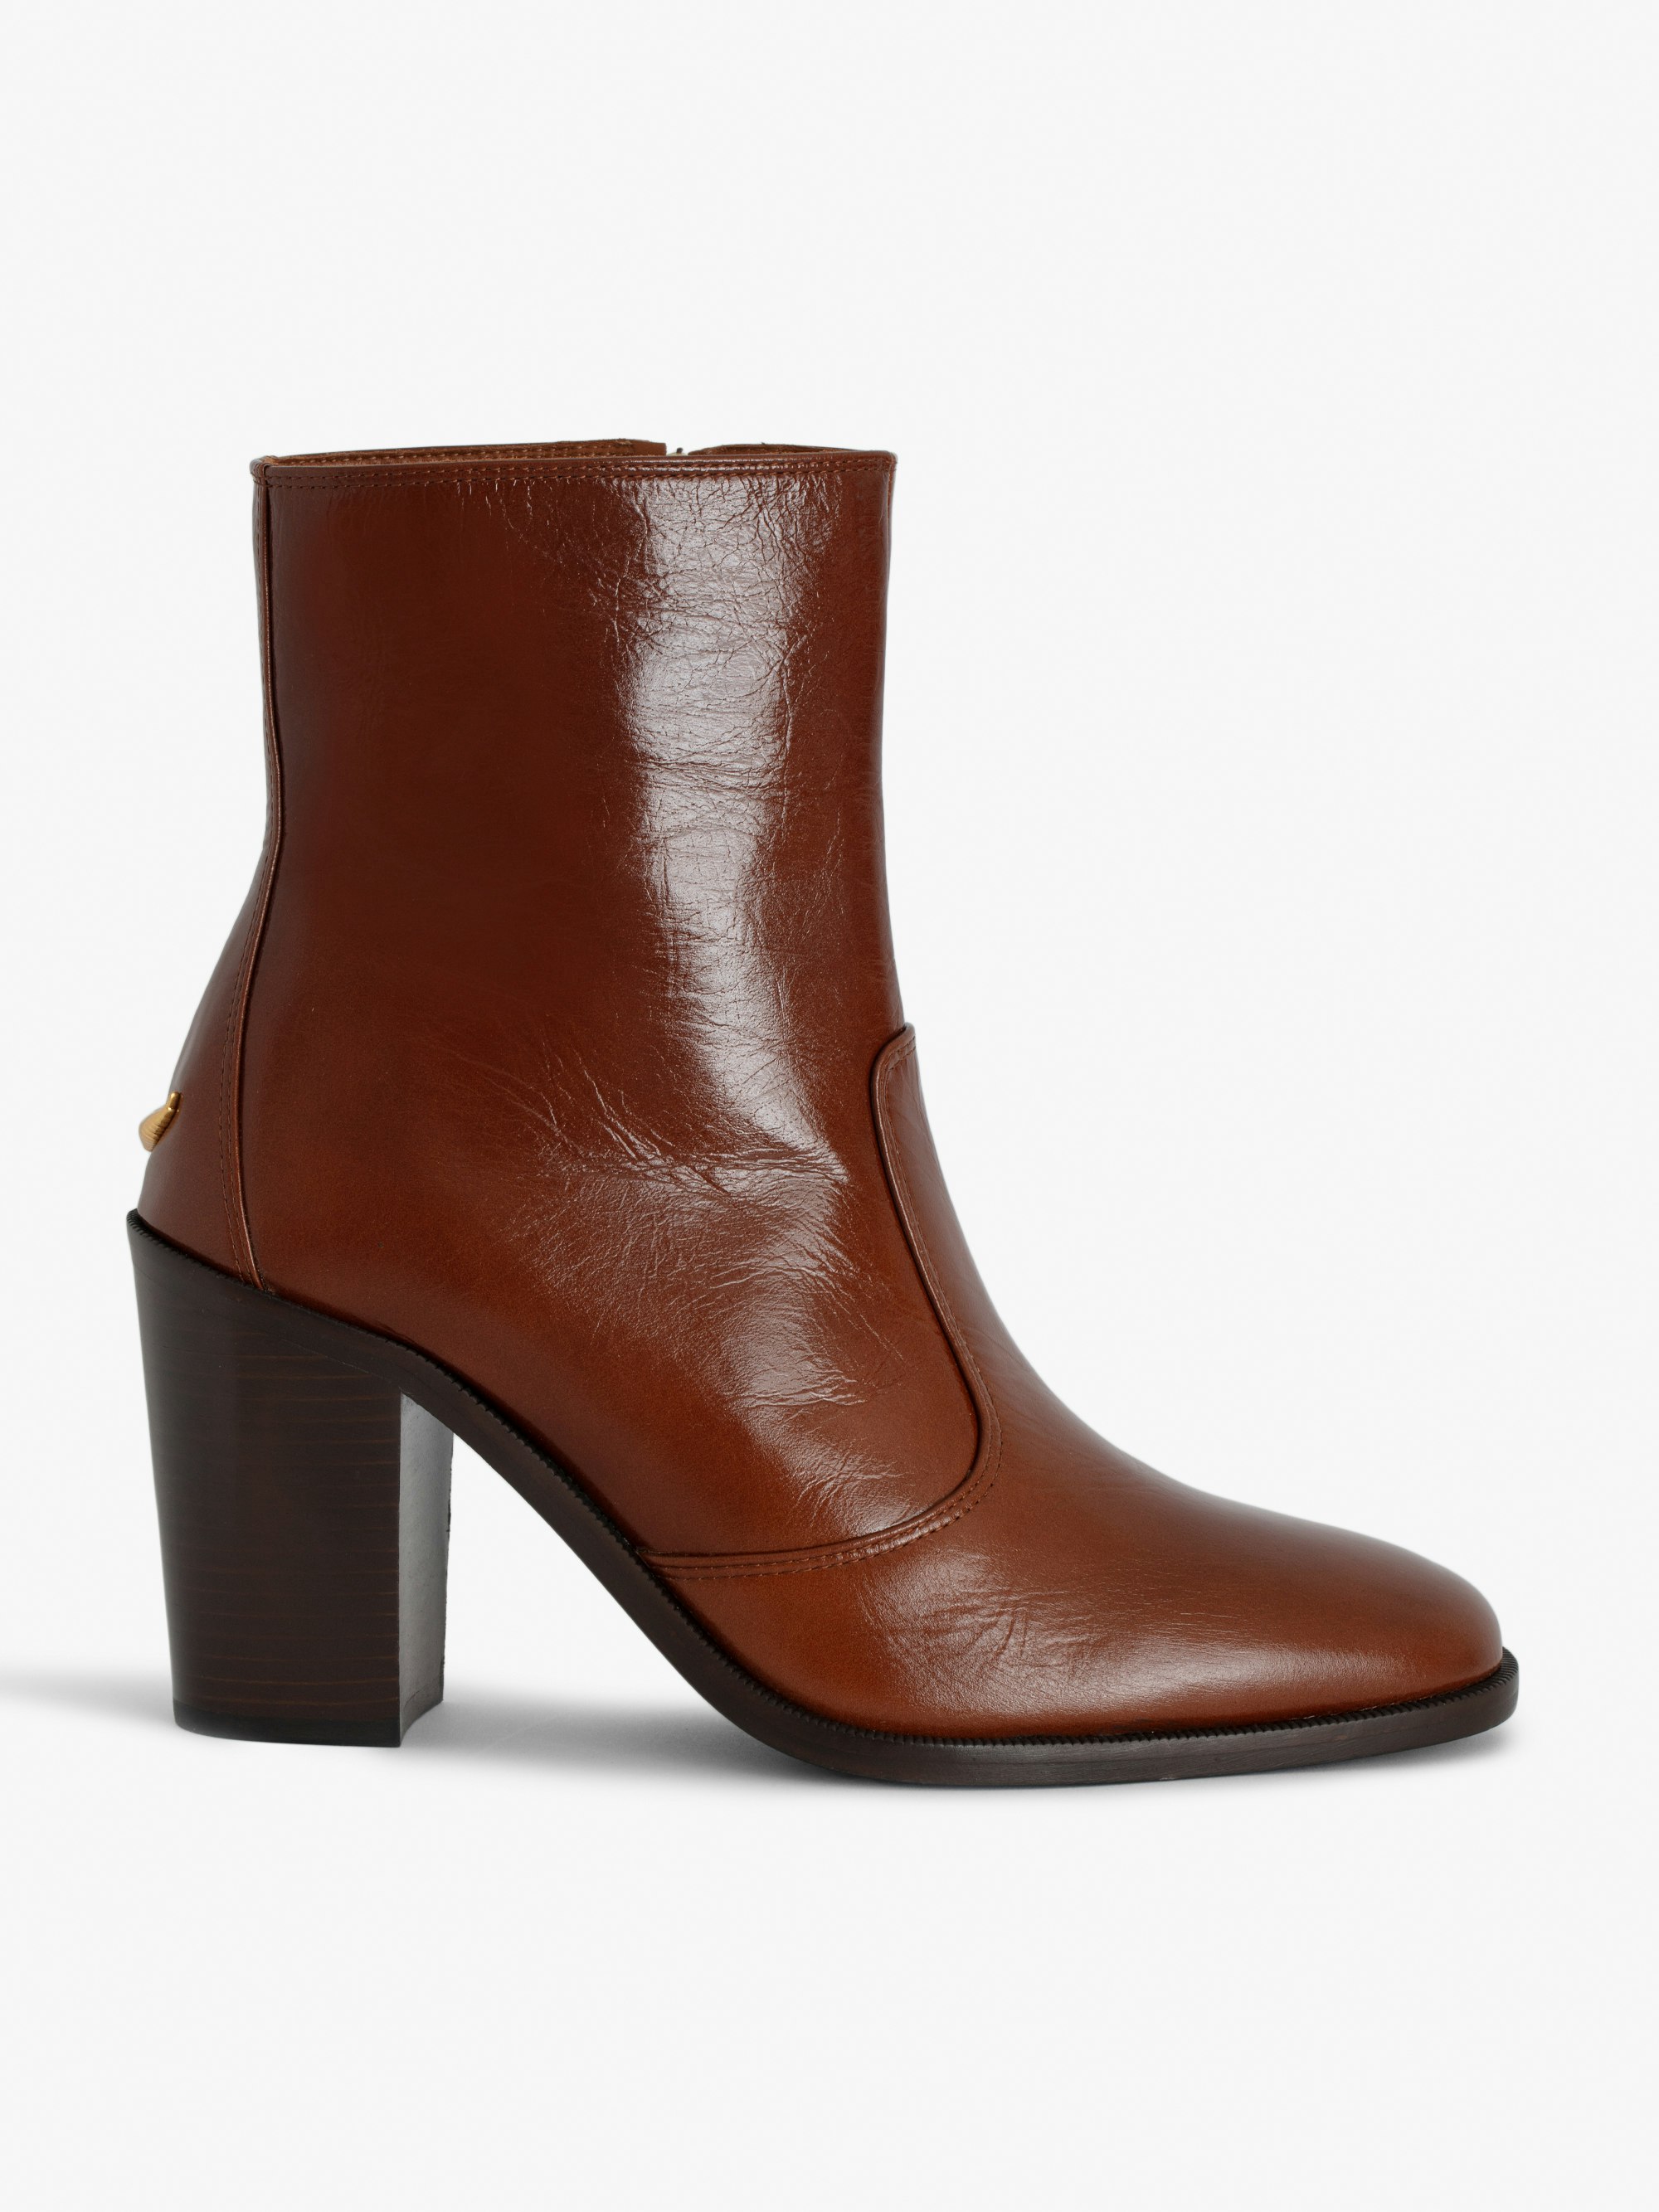 Preiser Ankle Boots - Crinkled patent-effect leather ankle boots embellished with signature wings.